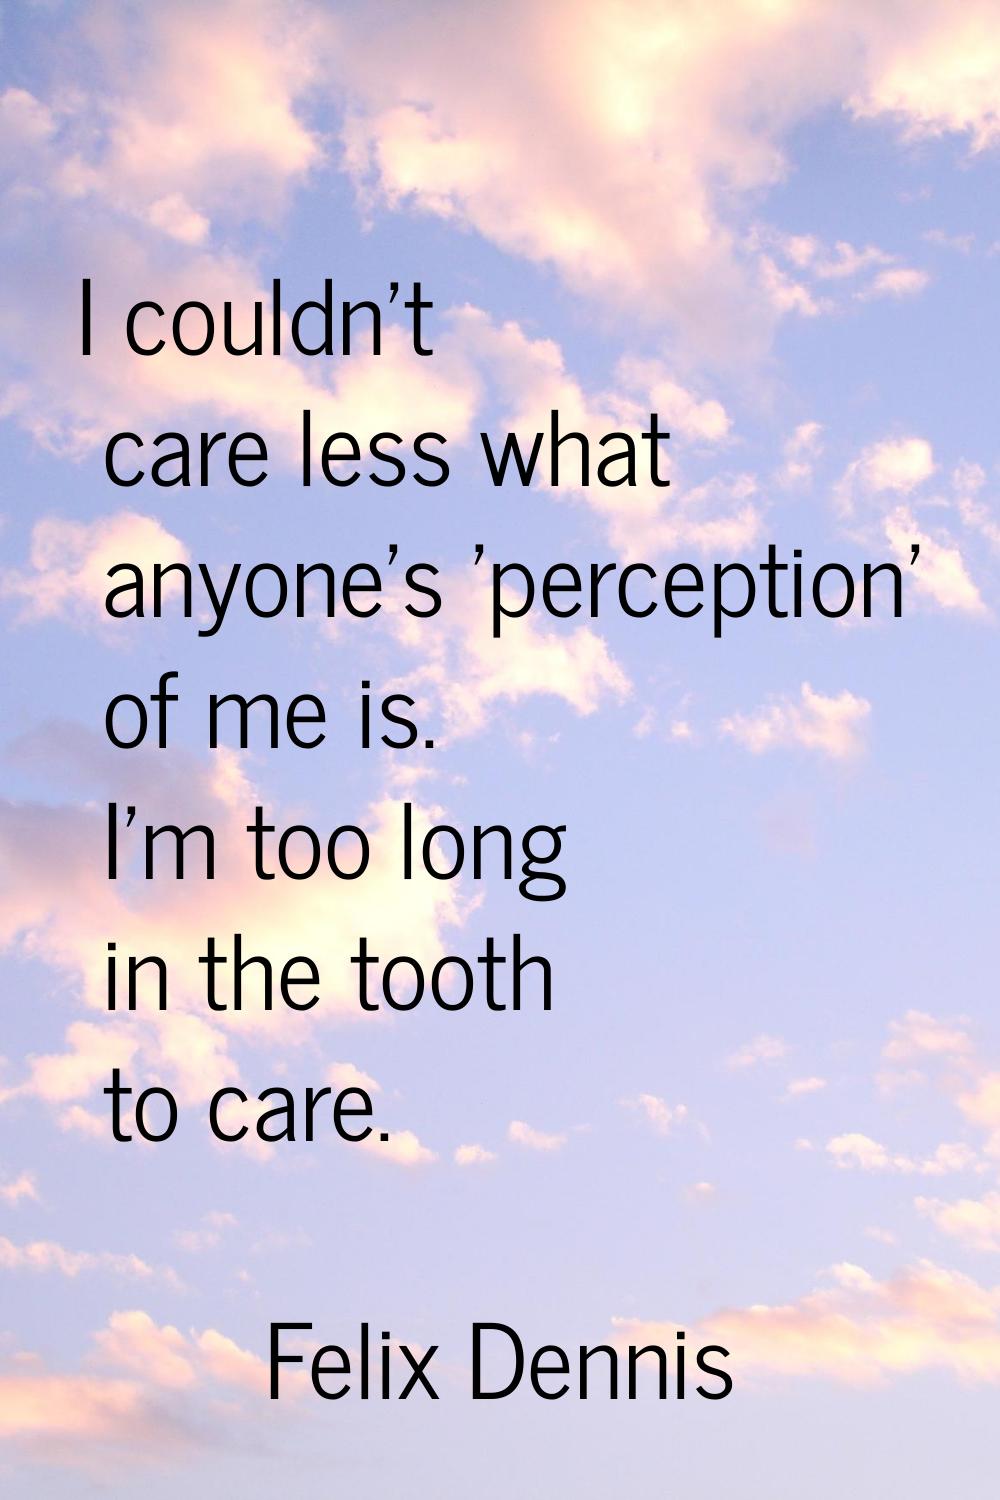 I couldn't care less what anyone's 'perception' of me is. I'm too long in the tooth to care.